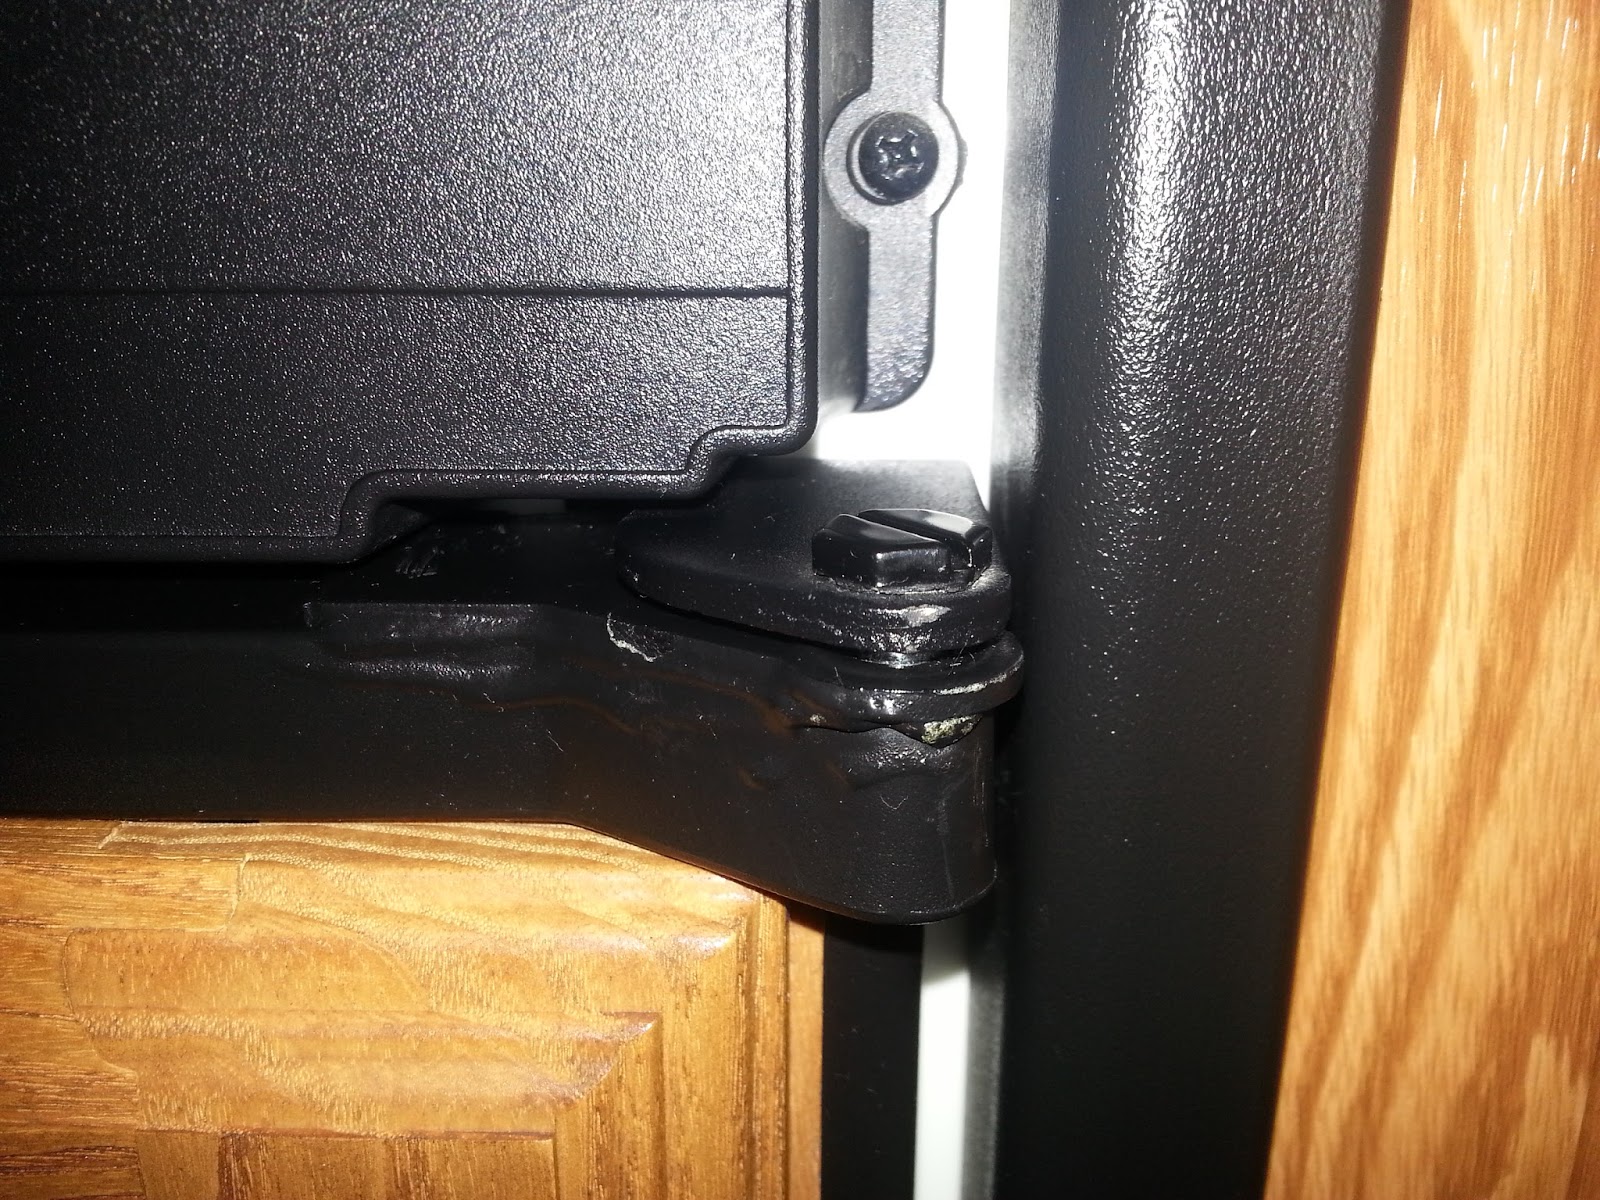 Norcold Fridge Replacement Hinges: Shameful Engineering by Norcold